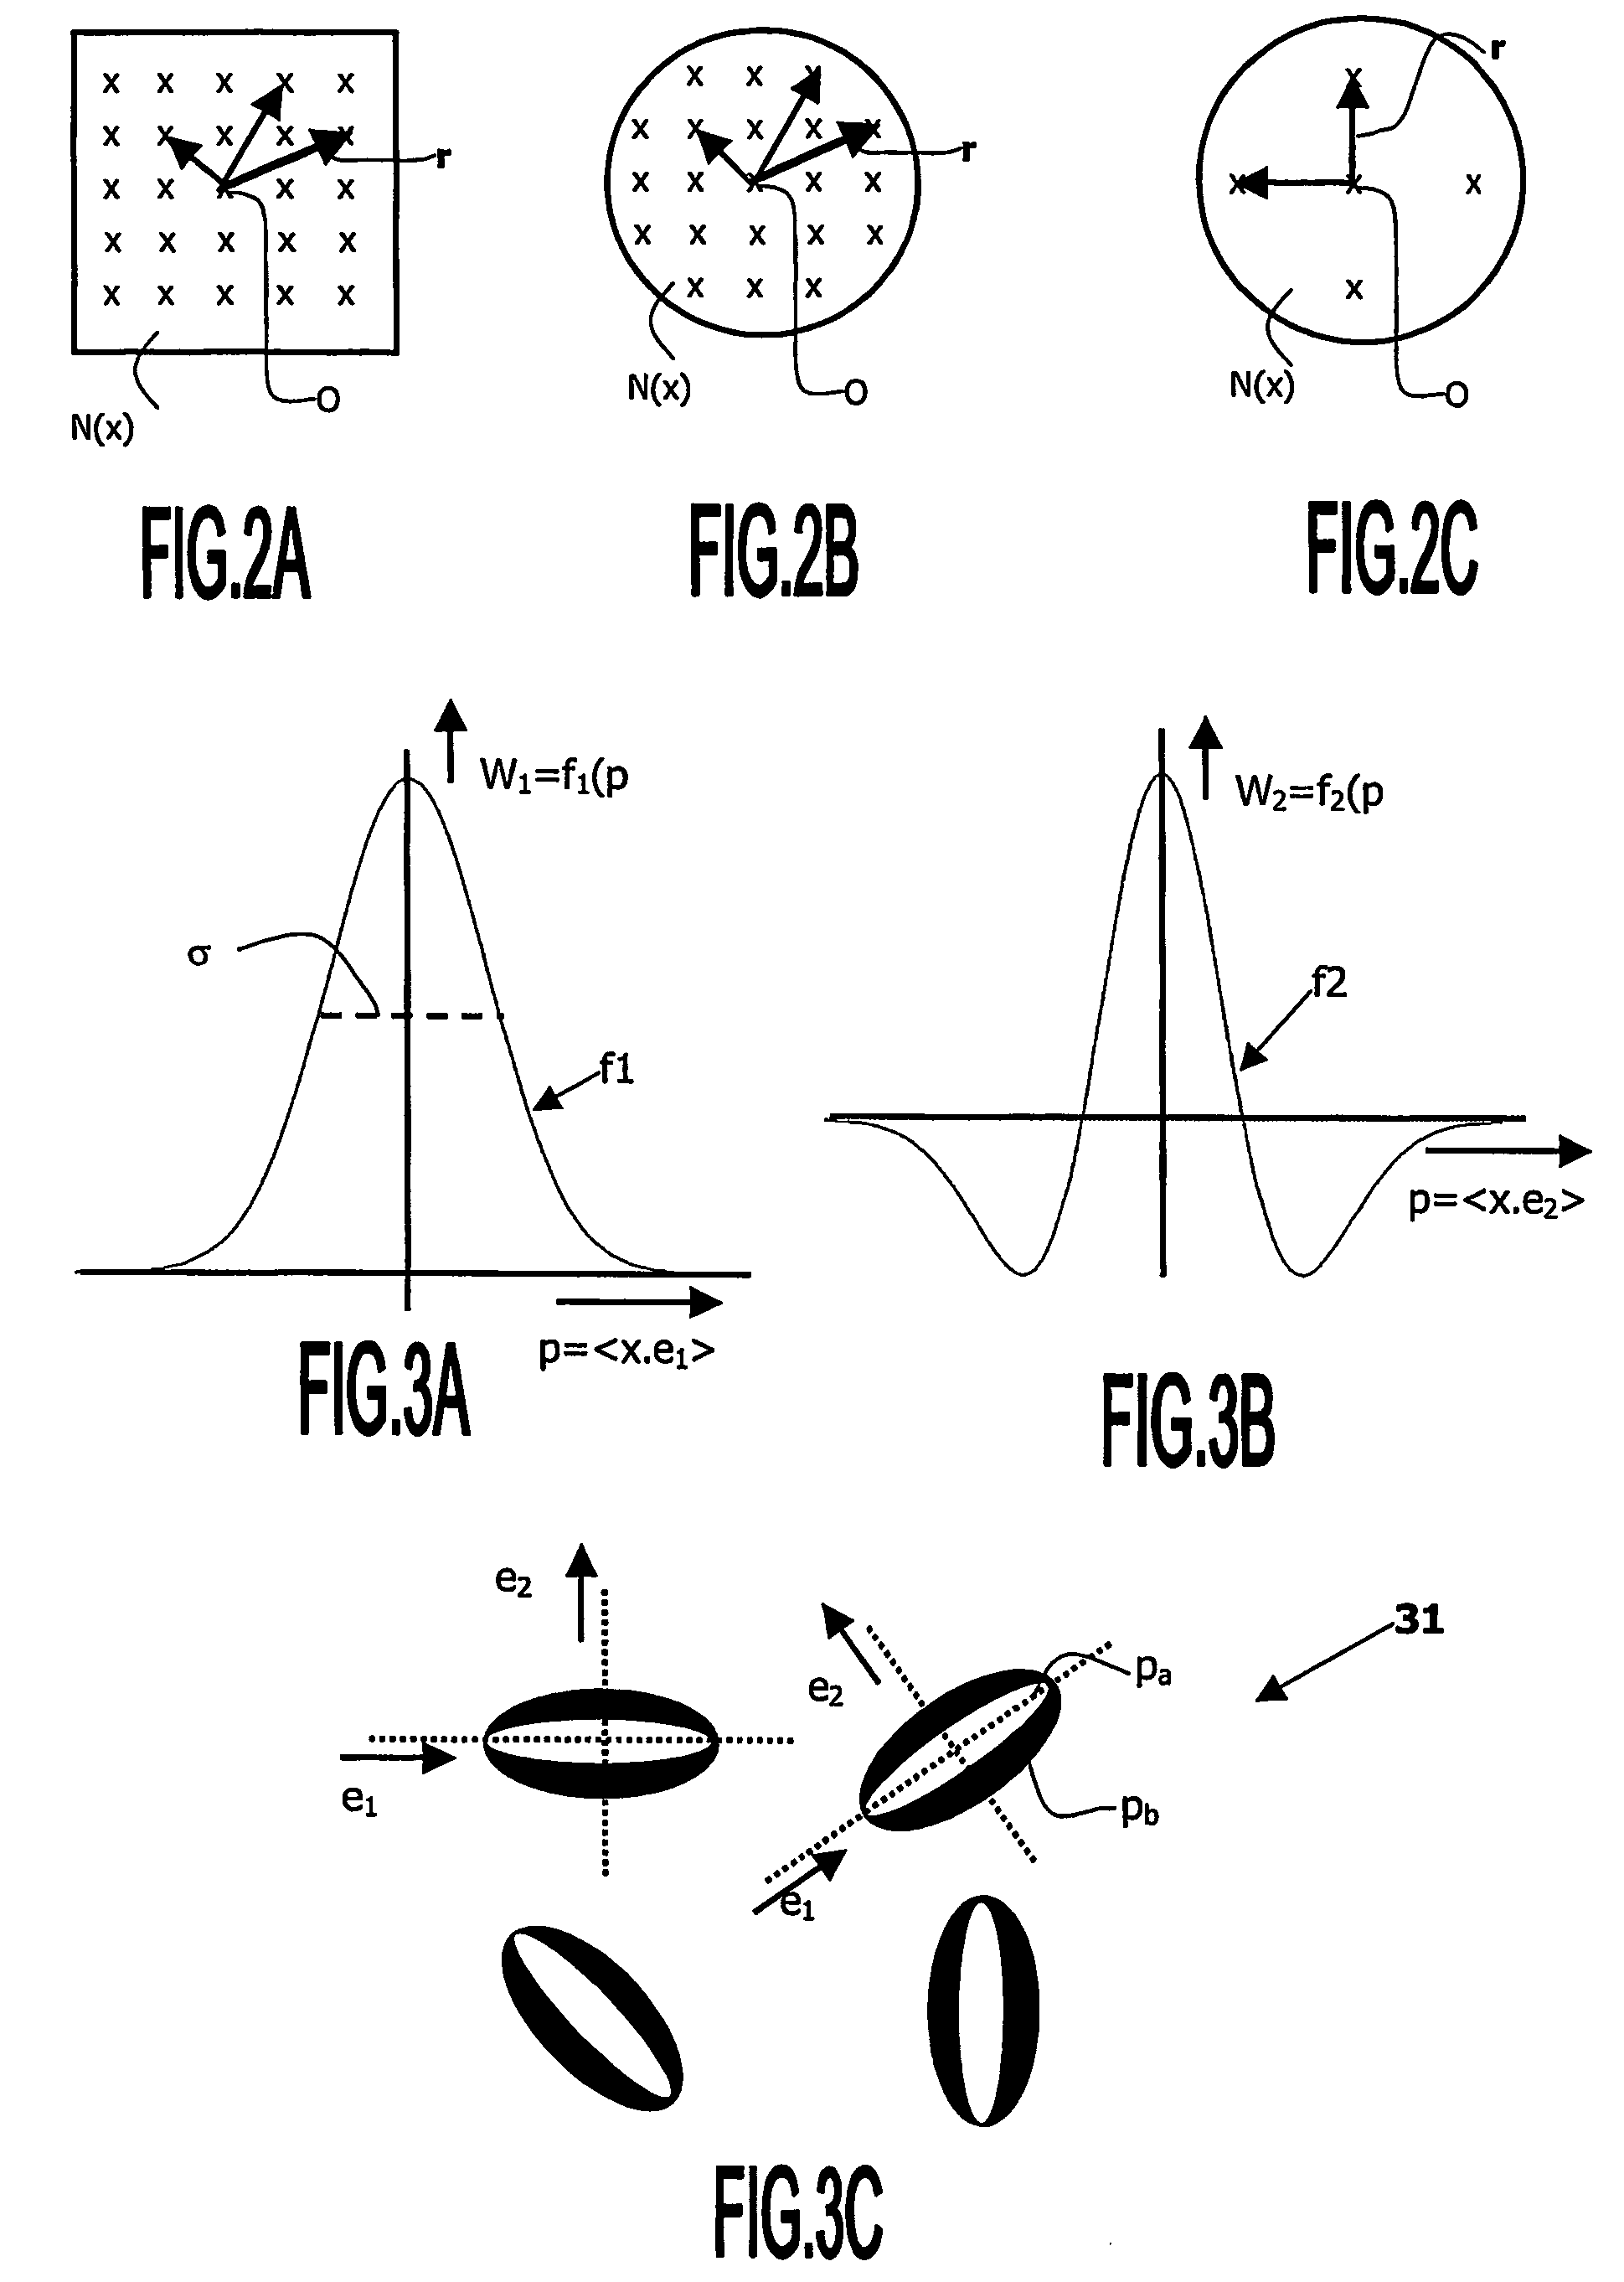 Image viewing and method for generating filters for filtering image feaures according to their orientation